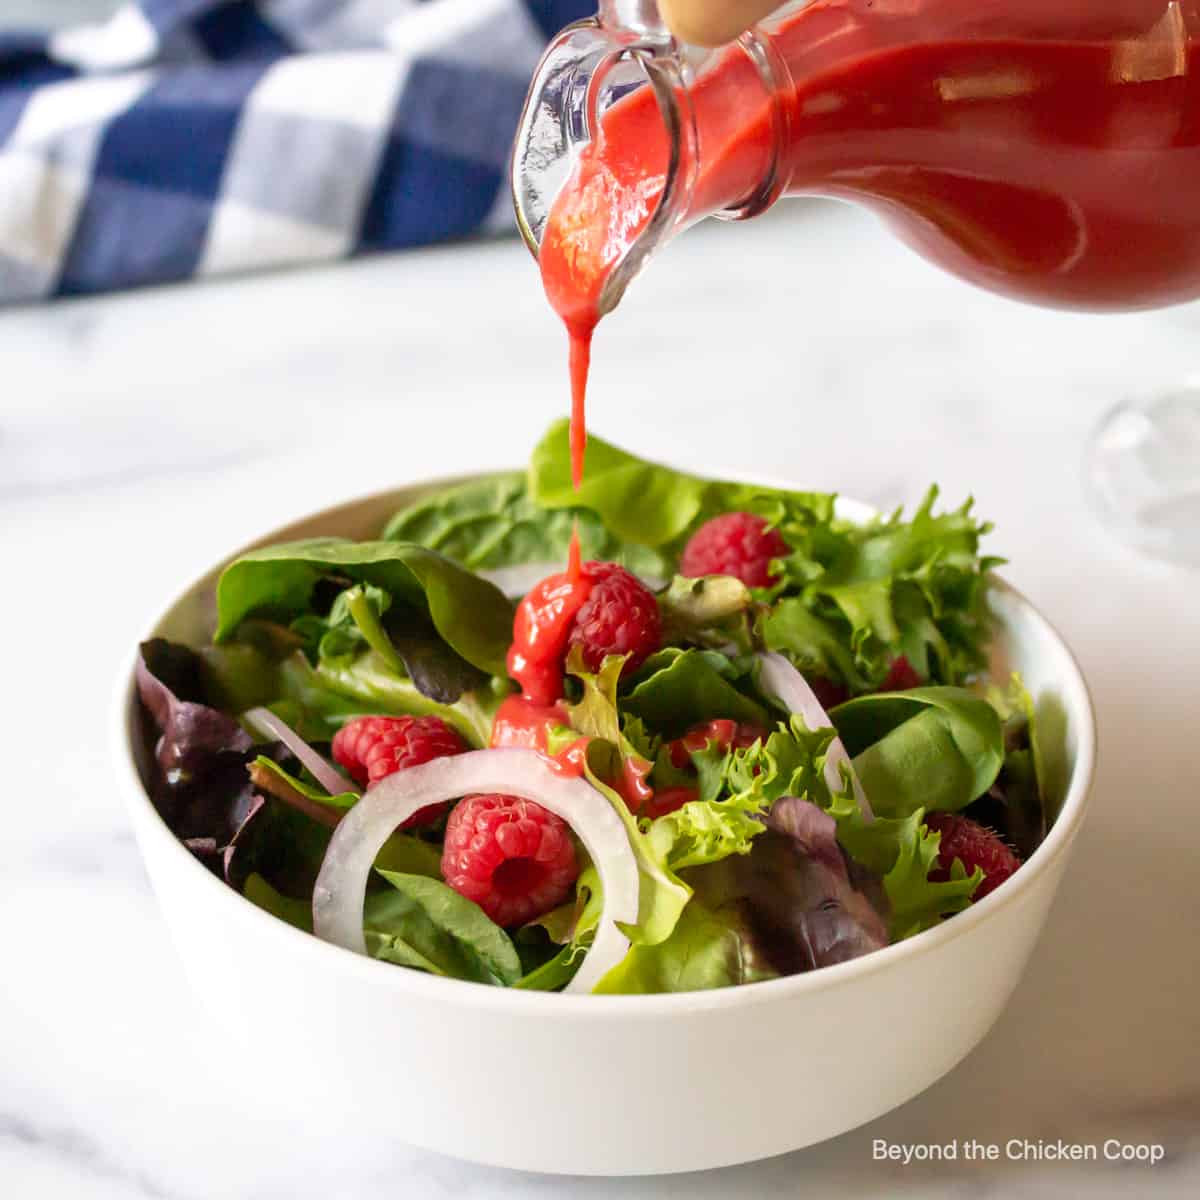 A raspberry dressing being poured over a green salad.